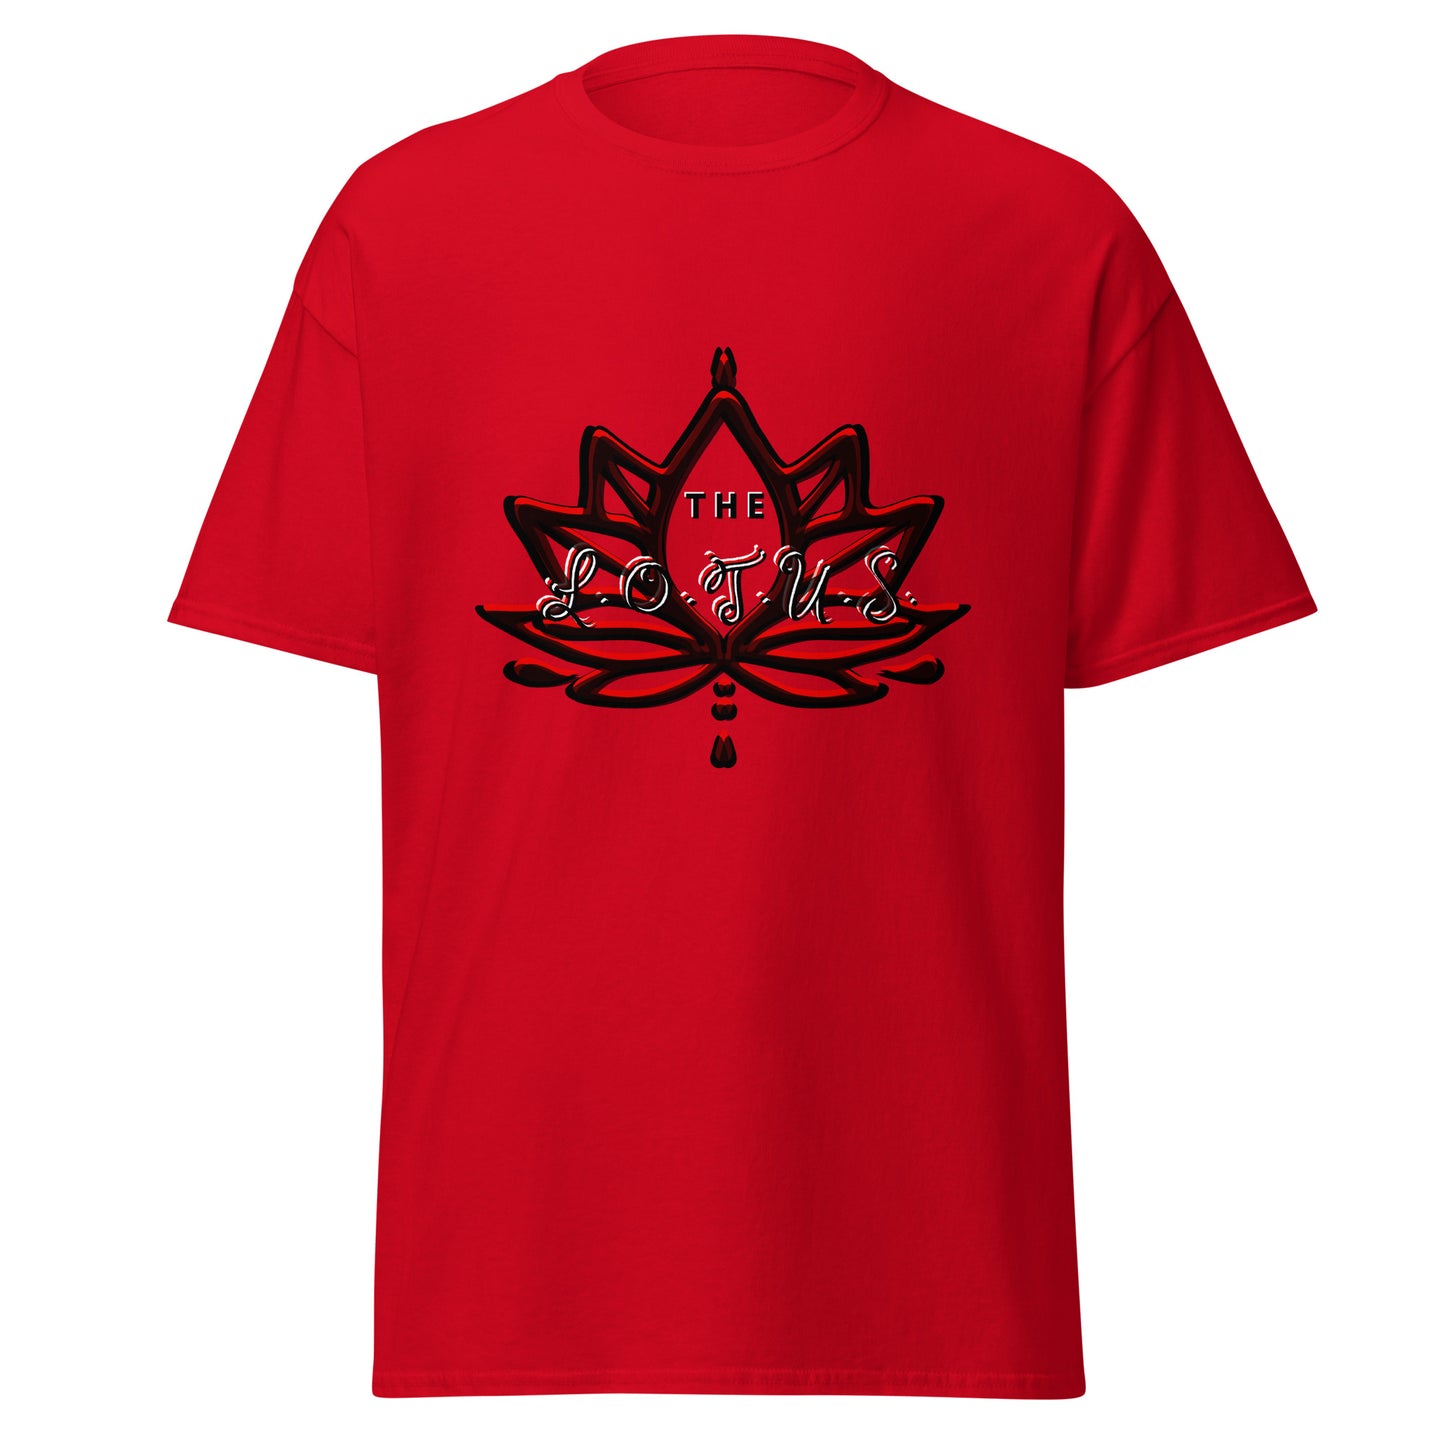 'The LOTUS' Logo 2 - 2Sided Men's classic tee